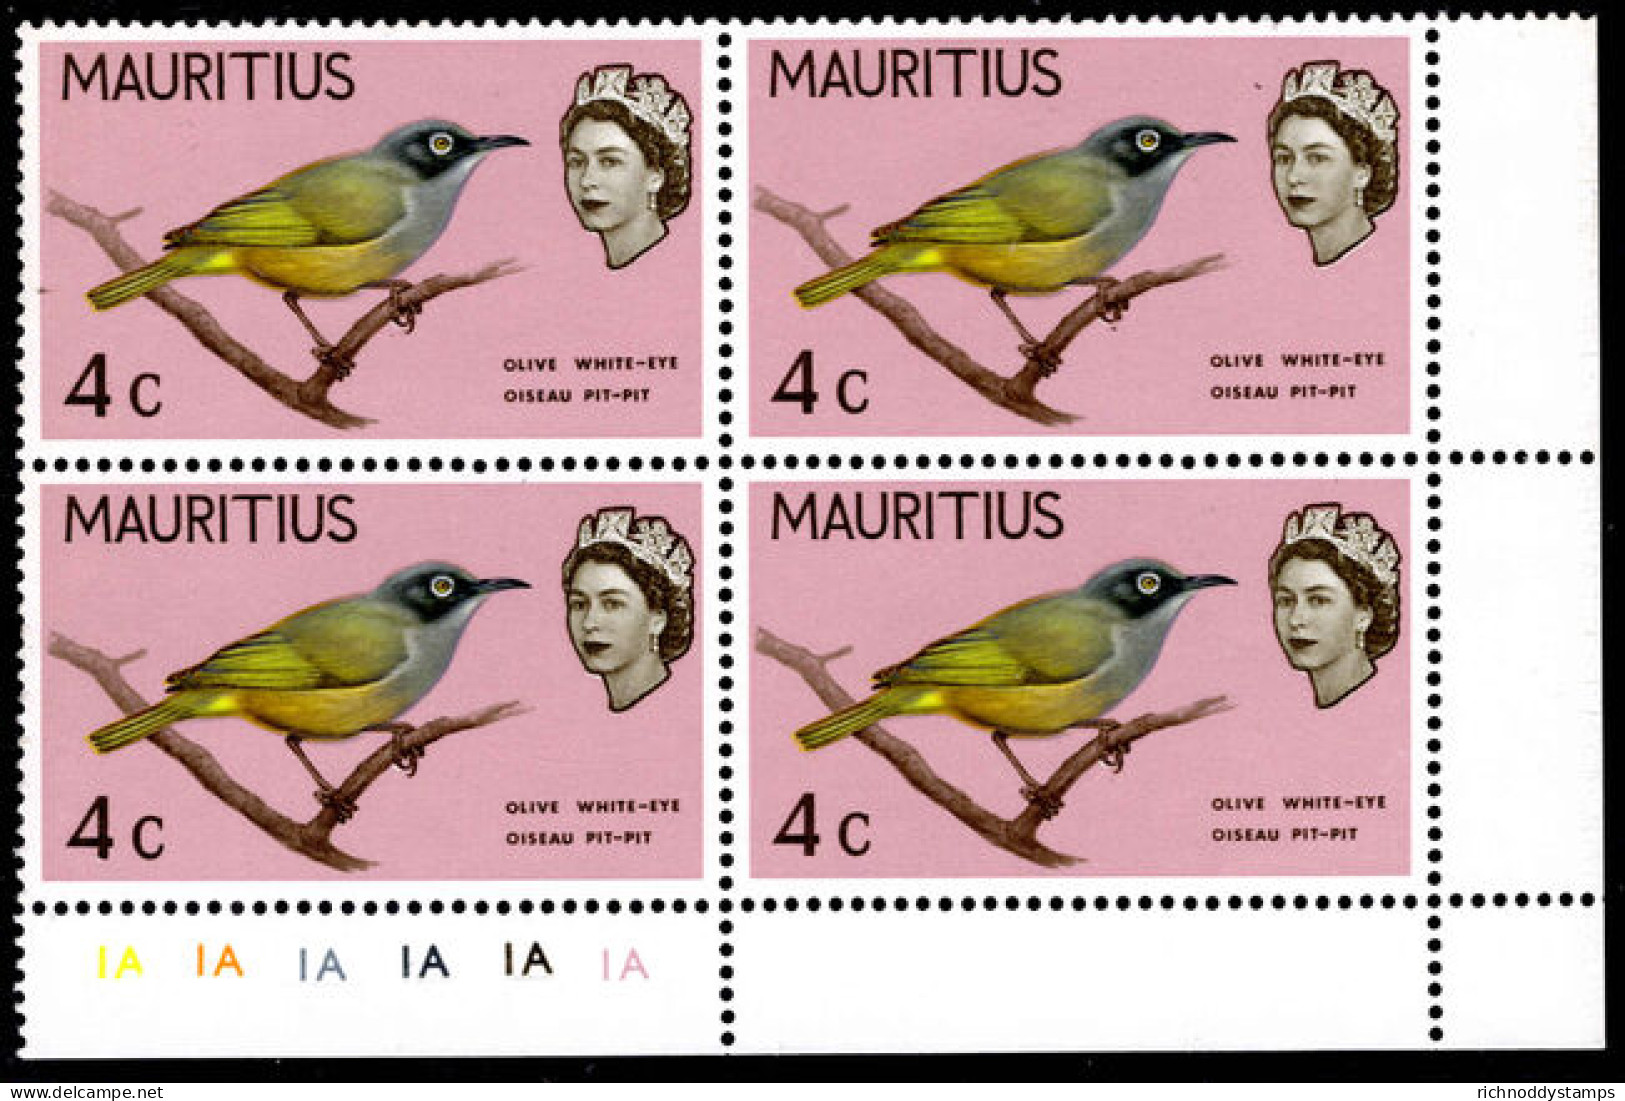 Mauritius 1965 4c With Minor Variety Broken Claw Block Of 4 Unmounted Mint. - Maurice (1968-...)